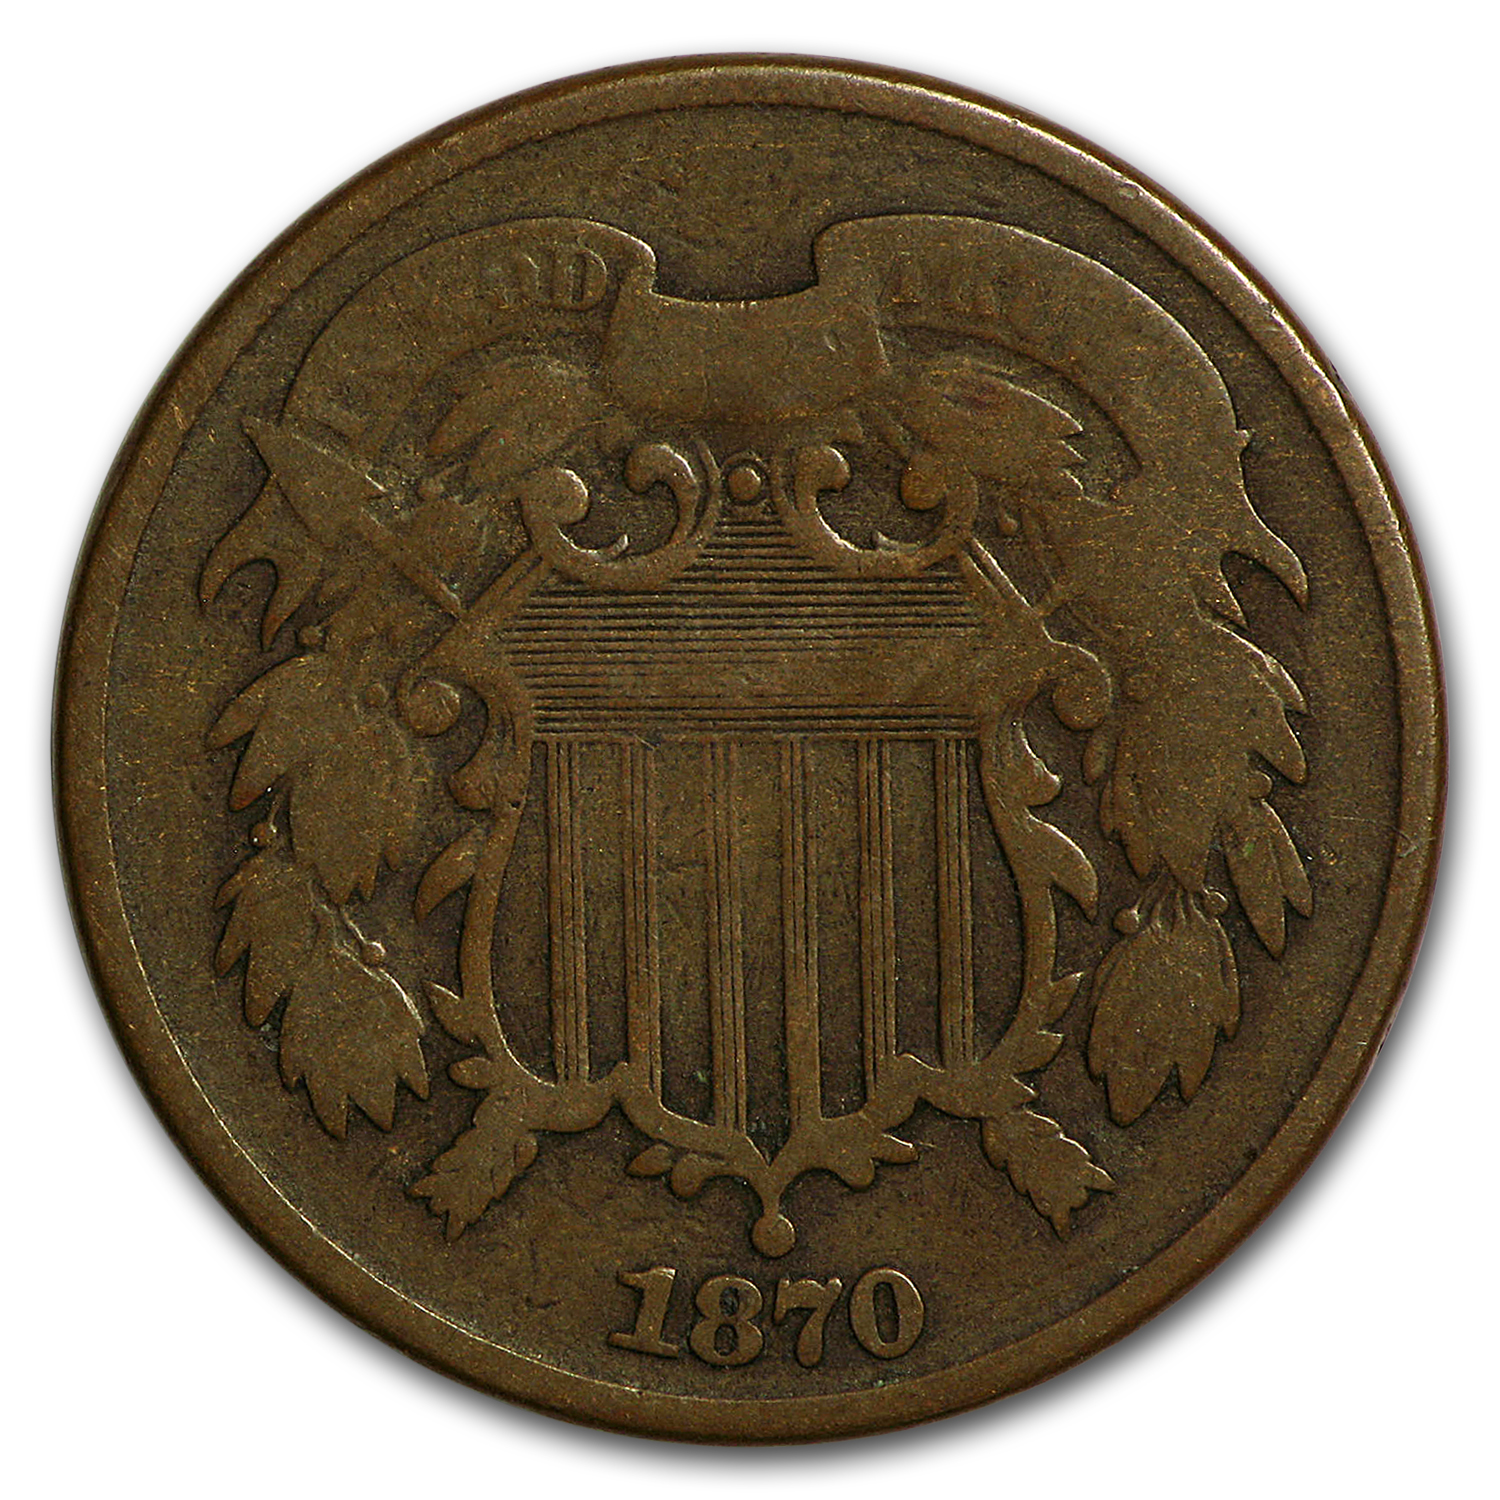 Buy 1870 Two Cent Piece VG